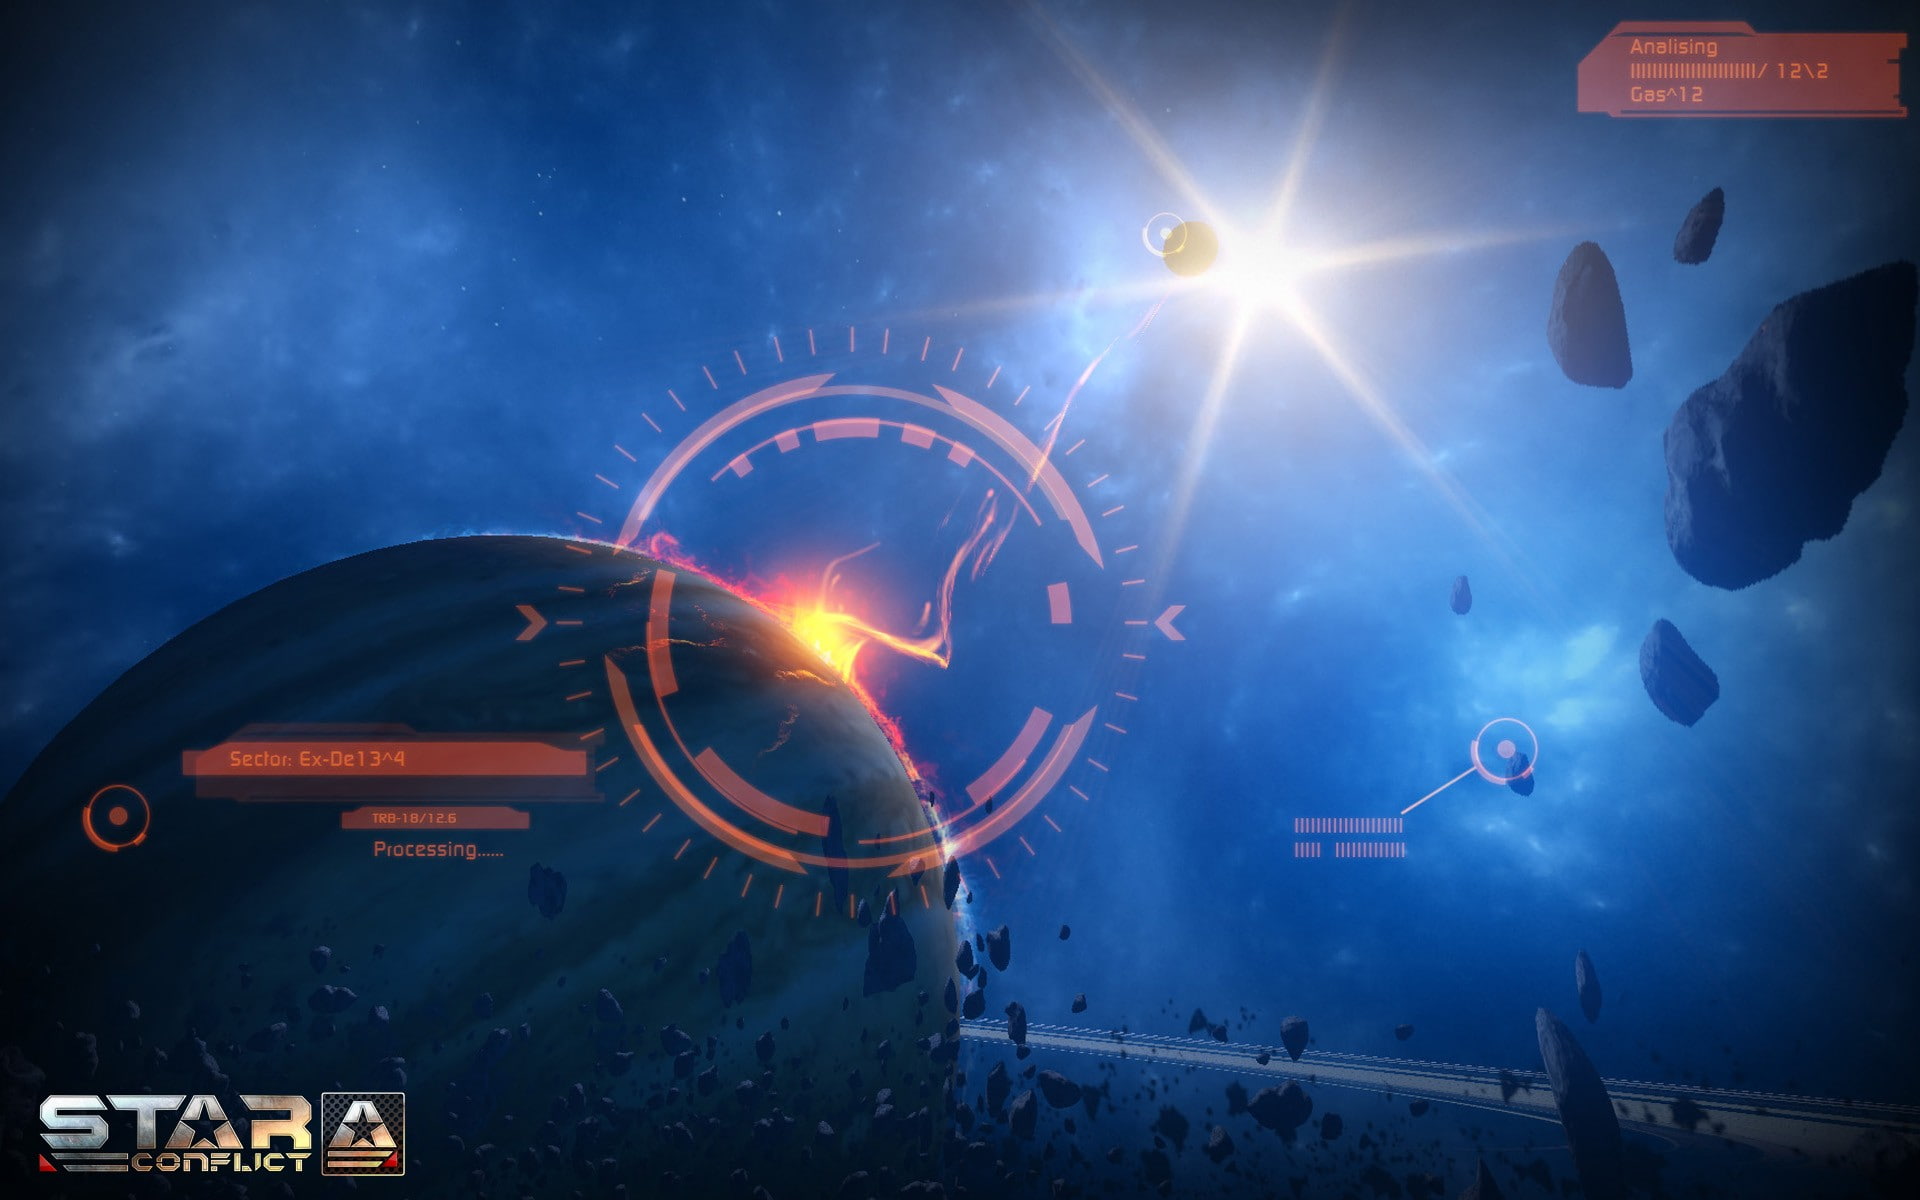 space, video games, Star conflict, lens flare, sky, night, nature